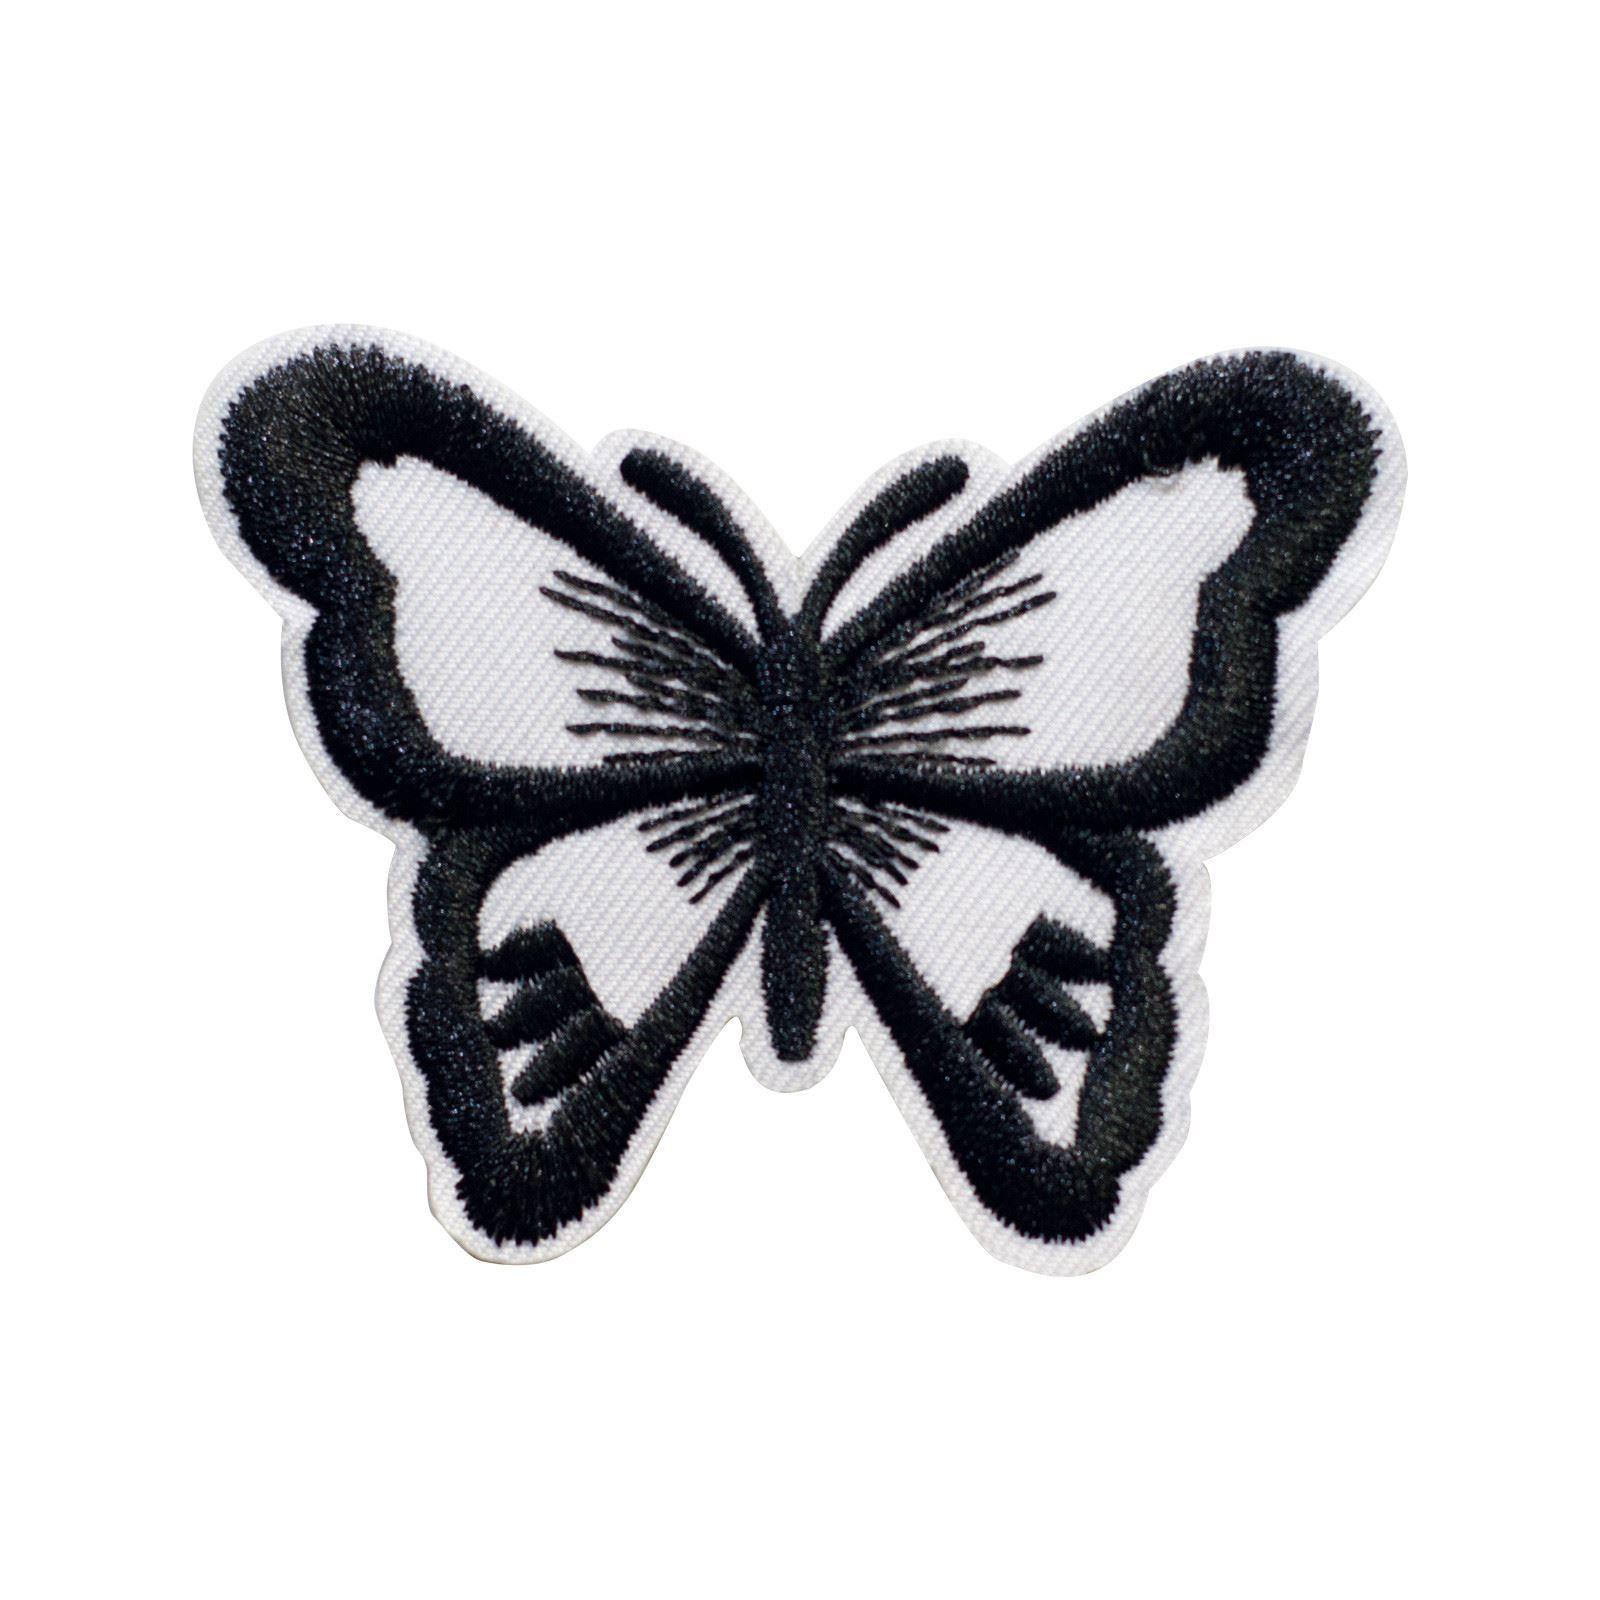 Butterfly Black and White Logo - Black white Butterfly (Iron on) Embroidery Applique Patch Sew Iron ...